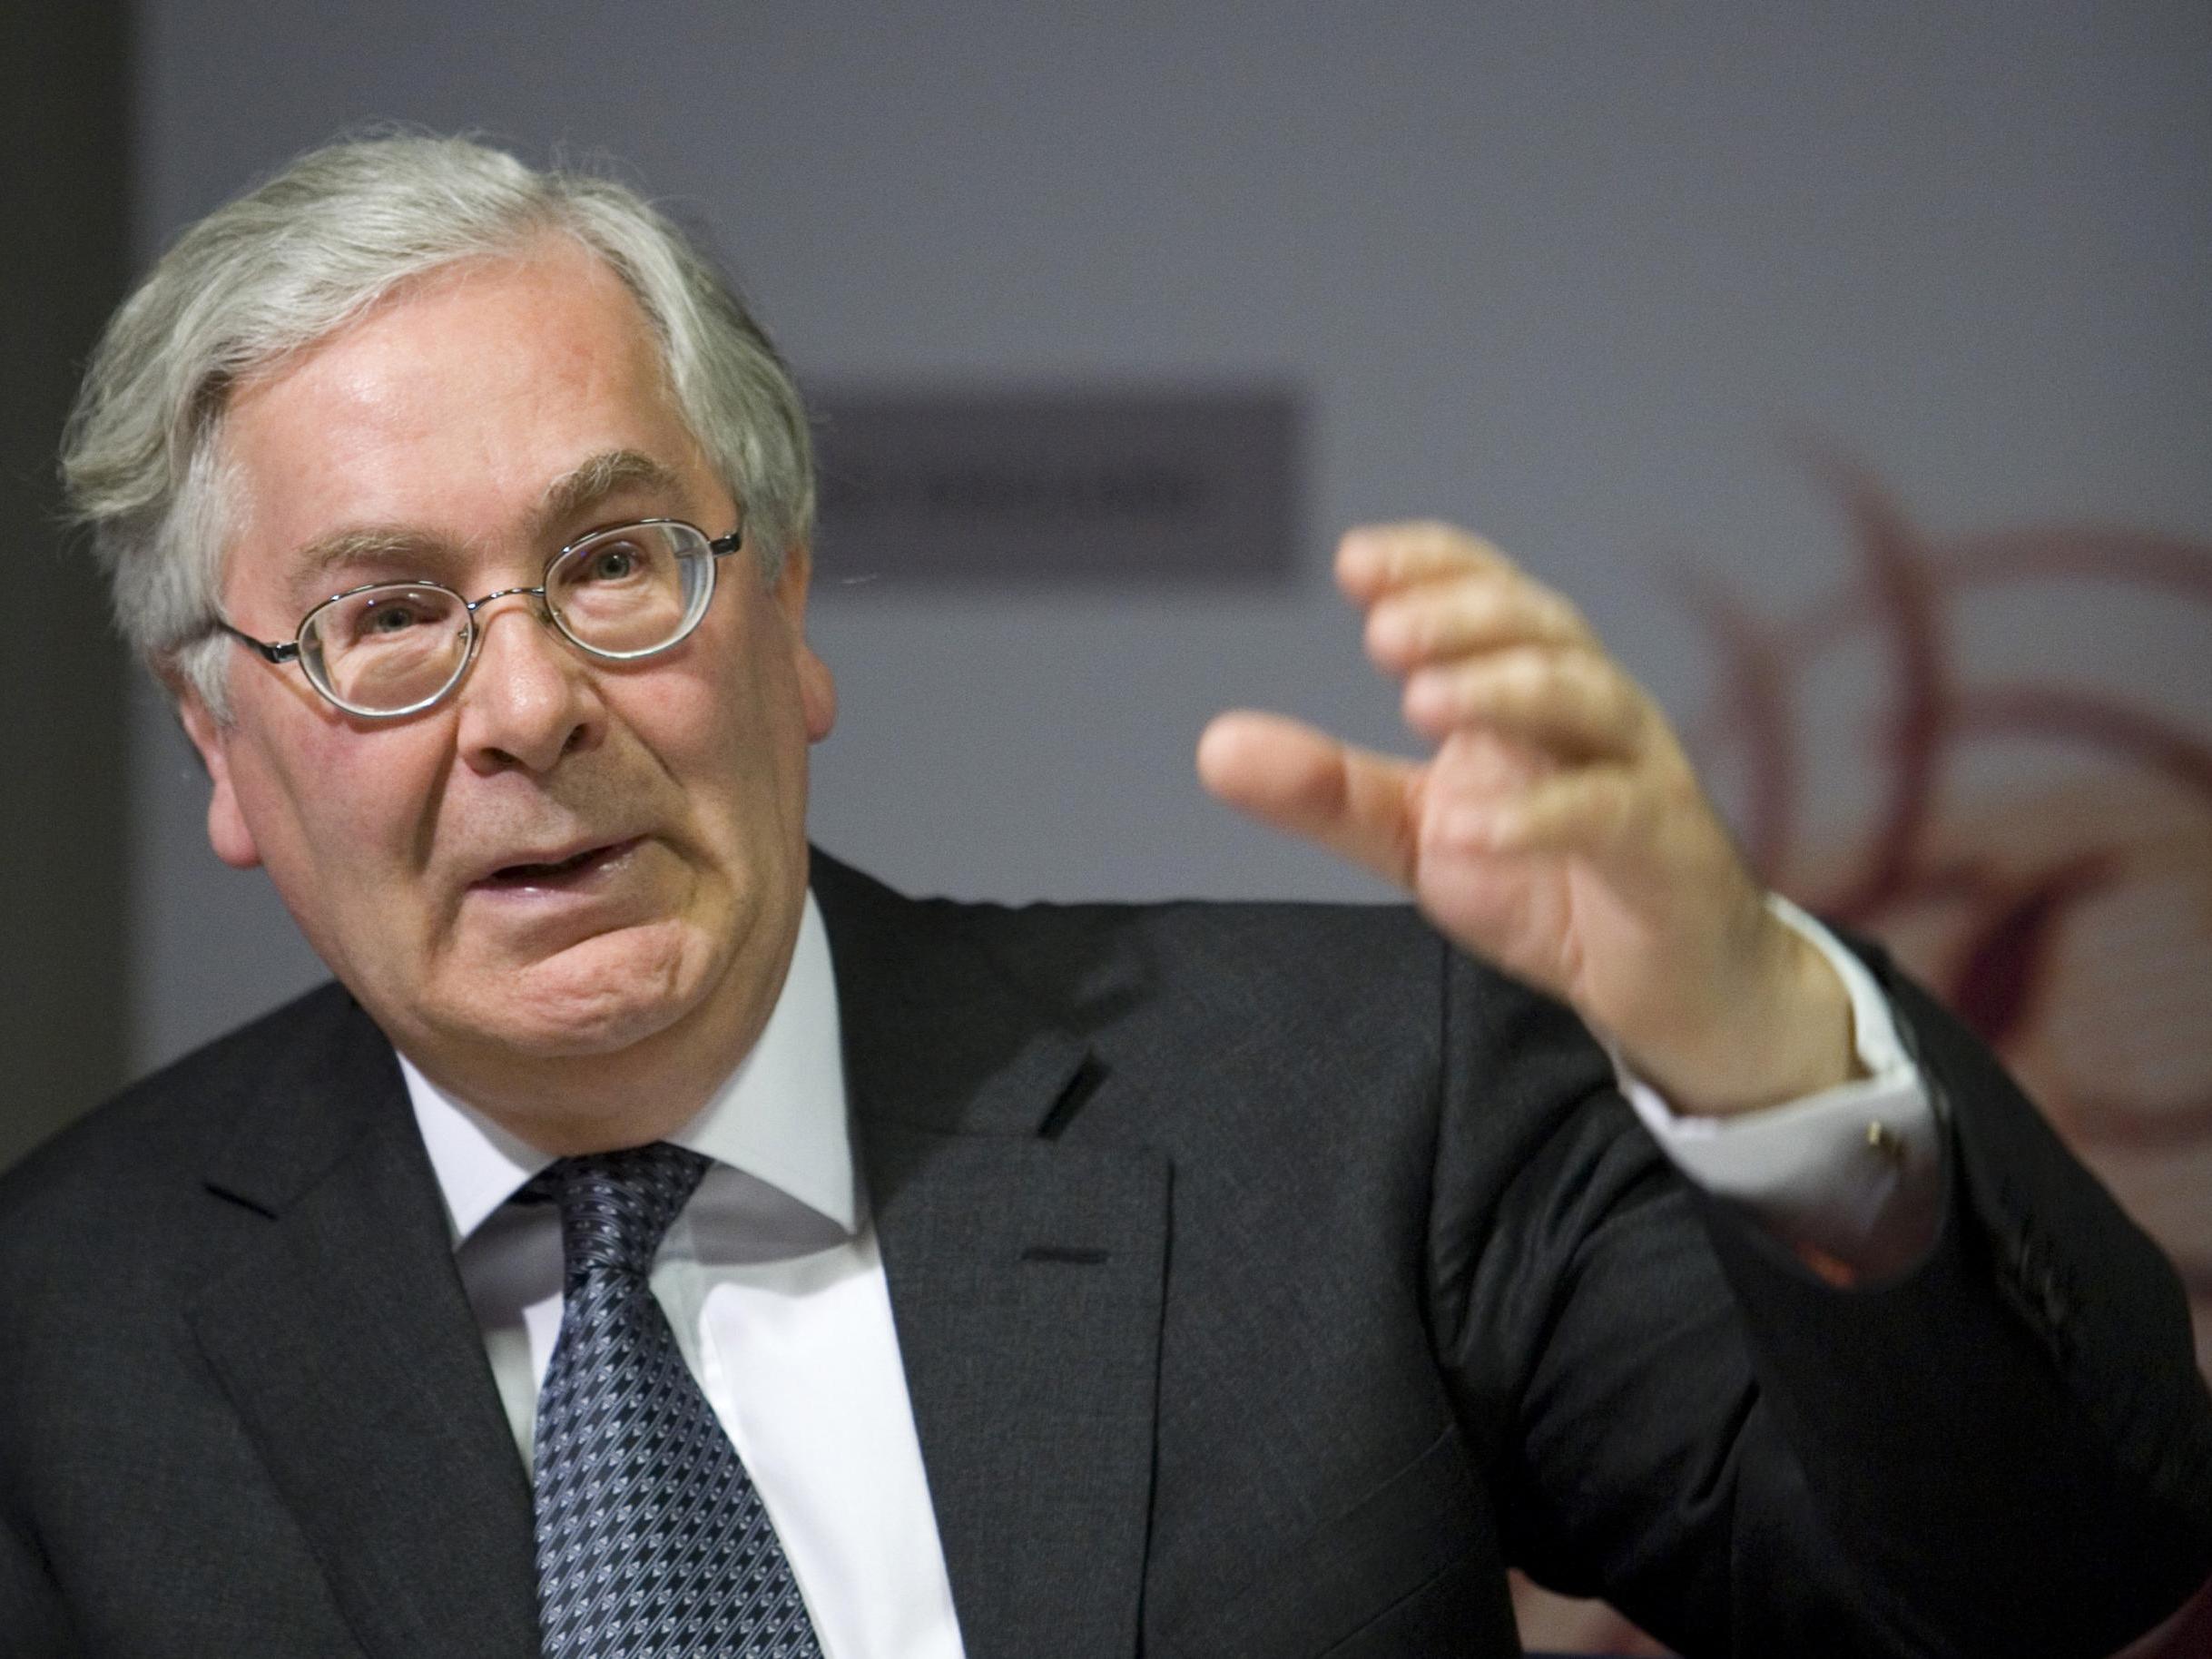 The Brexit debate is stopping politicians from addressing the UK's economic problems, former Bank of England chief Mervyn King has warned